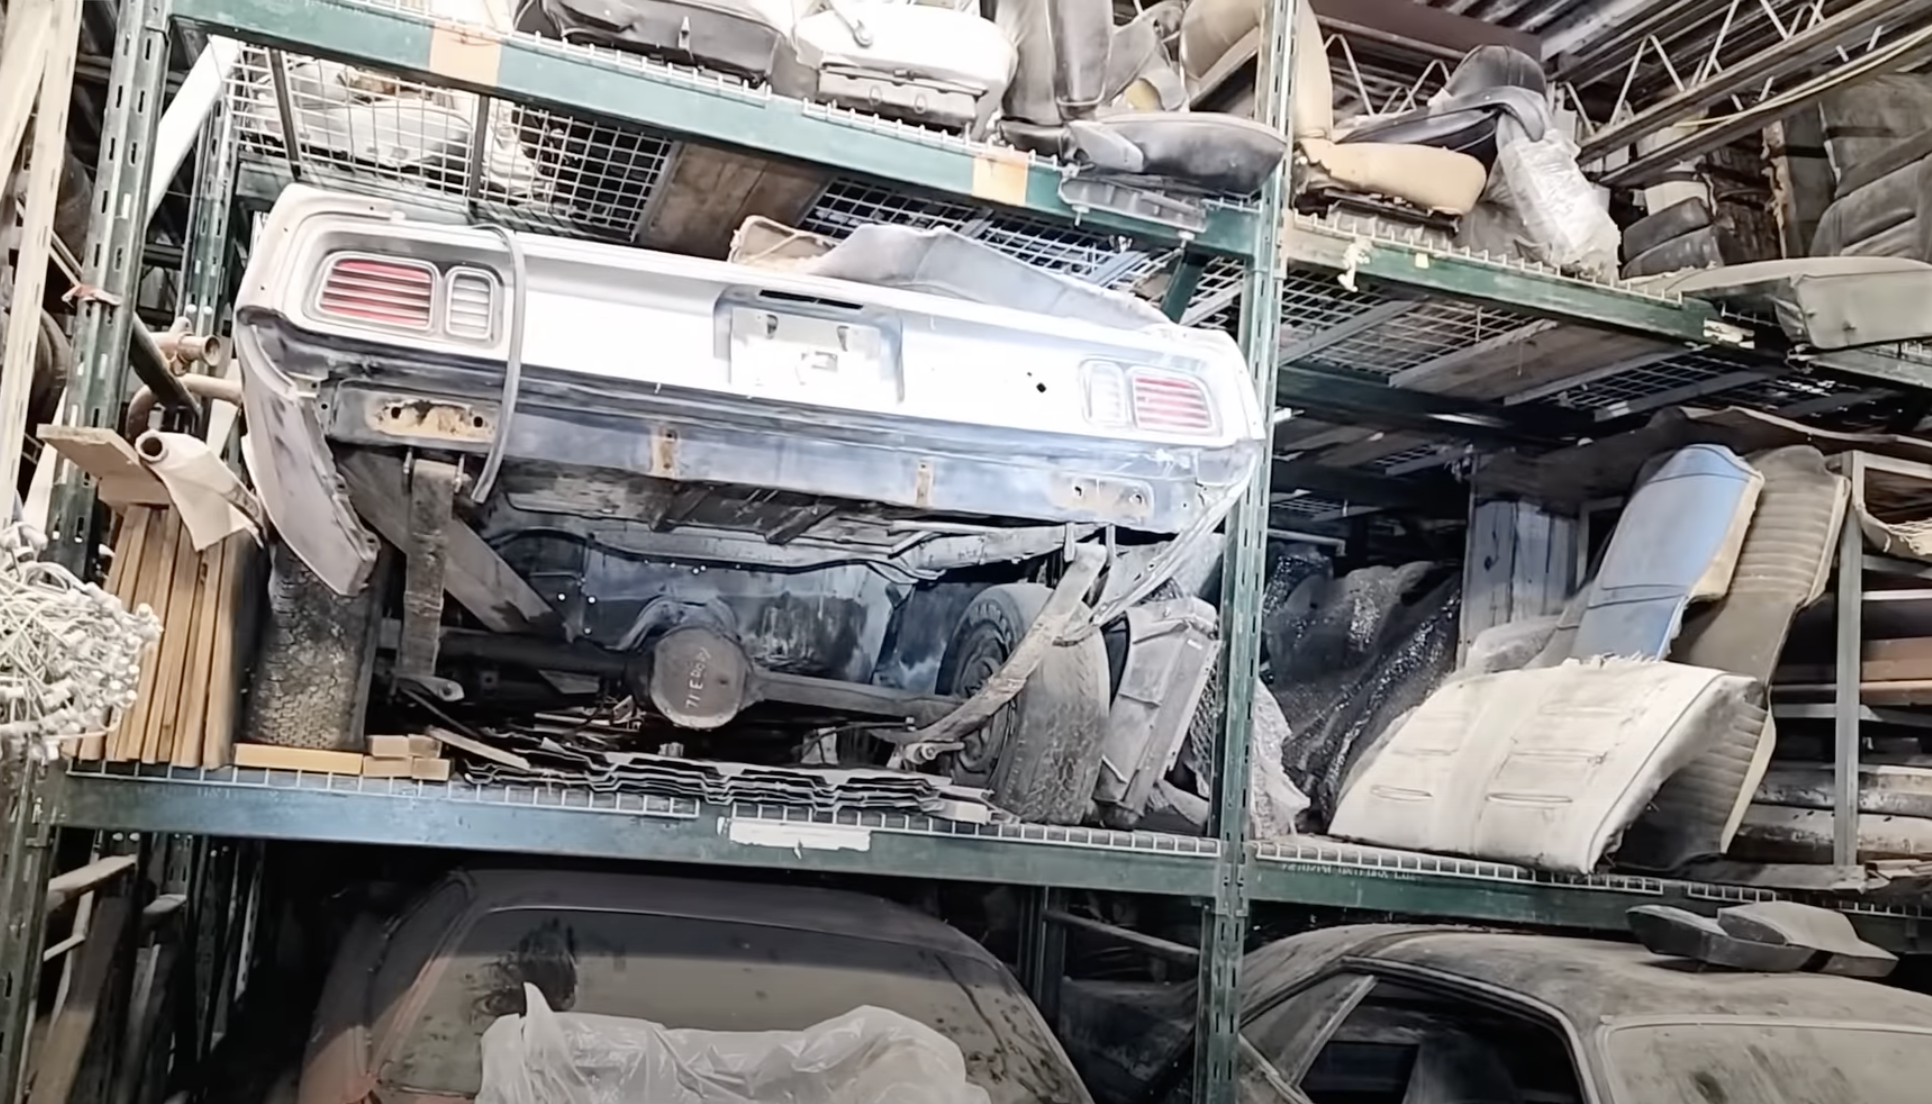 Better Than a Barn Find: Floor-to-Ceiling Mopar Muscle Cars and Spare Parts Found in a Warehouse